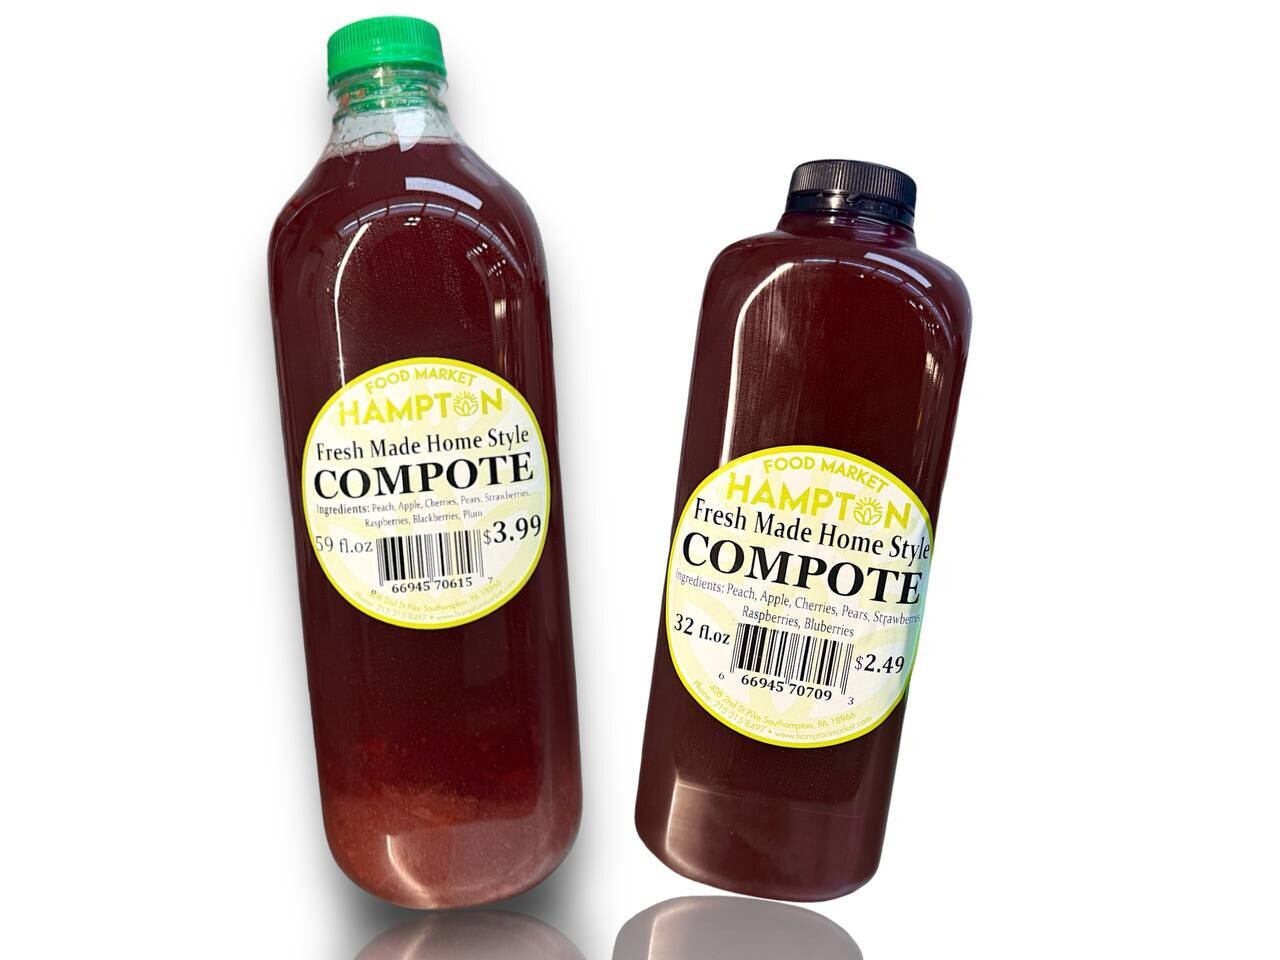 Fresh Made Home Style COMPOTE 59 fl.oz